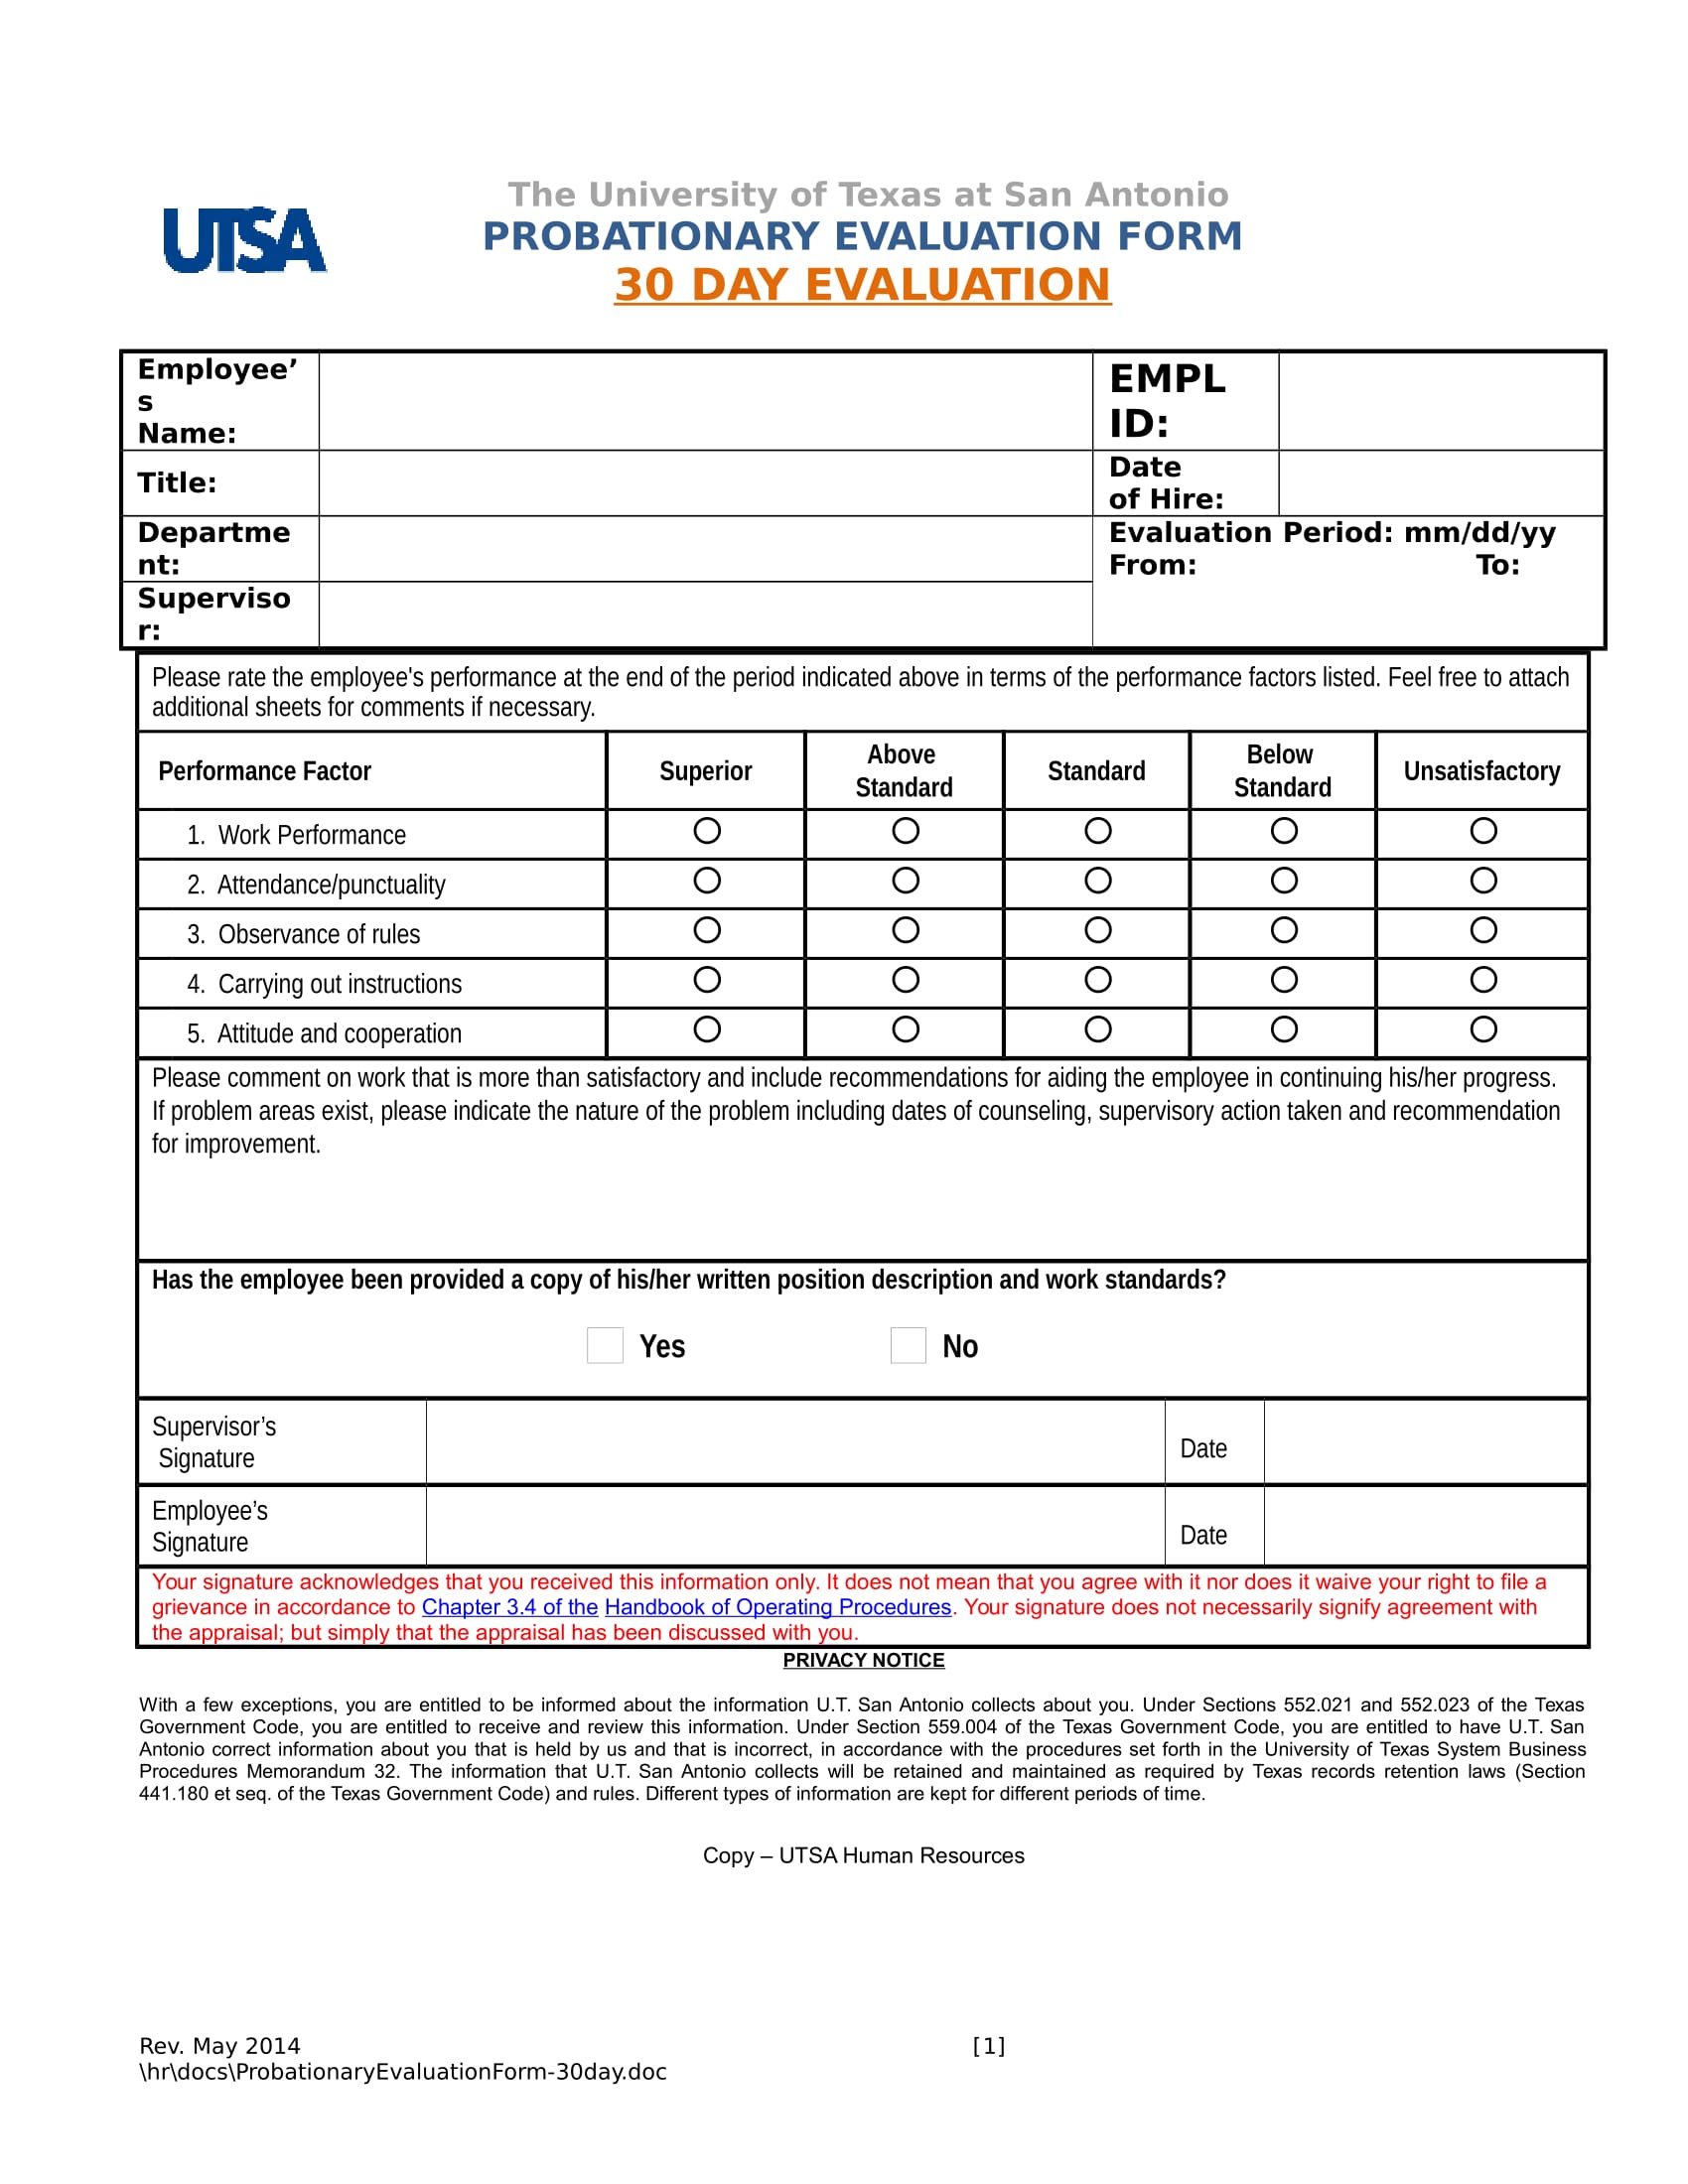 30 day probationary evaluation review form 1